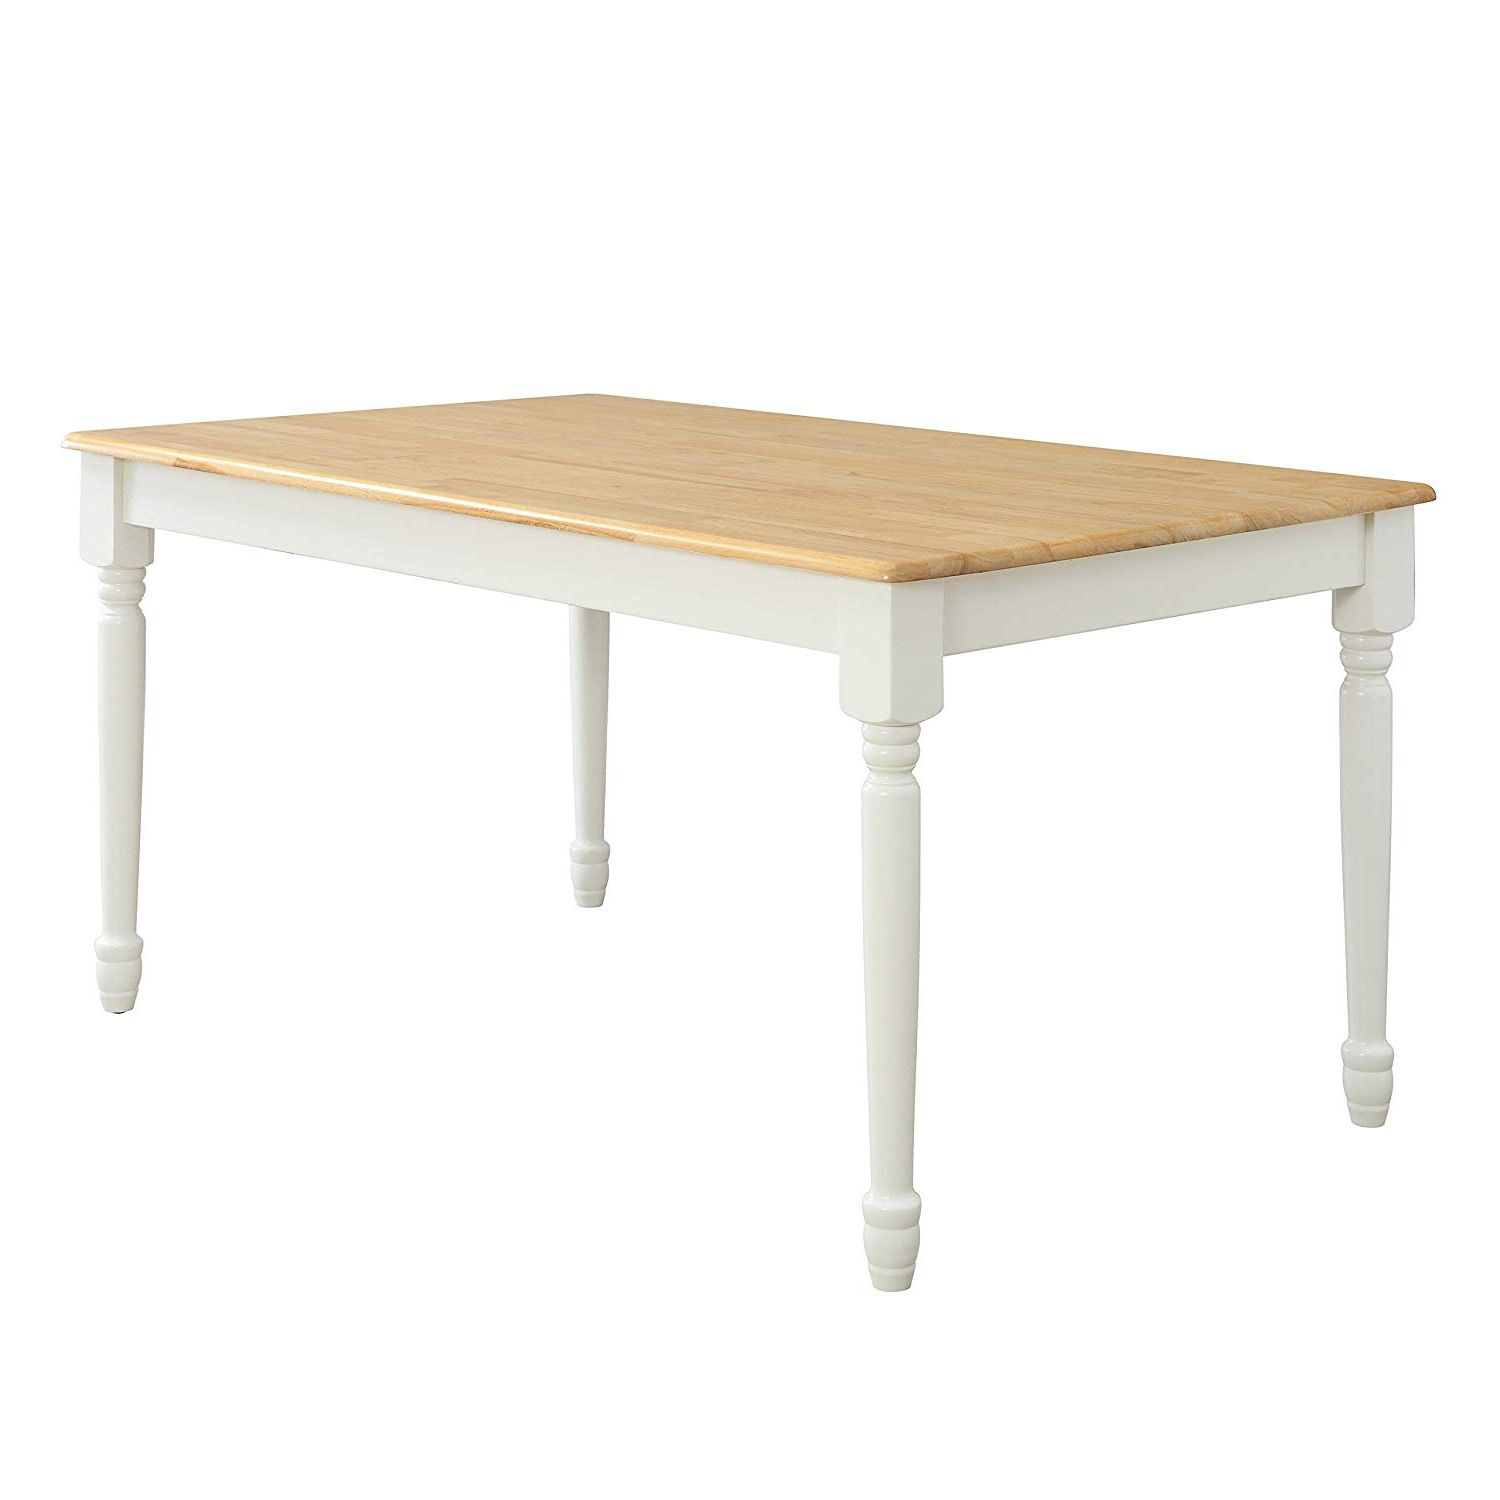 Amazon – Sturdy White/natural Rectangular Dining Table For Well Liked Large Rustic Look Dining Tables (View 10 of 30)